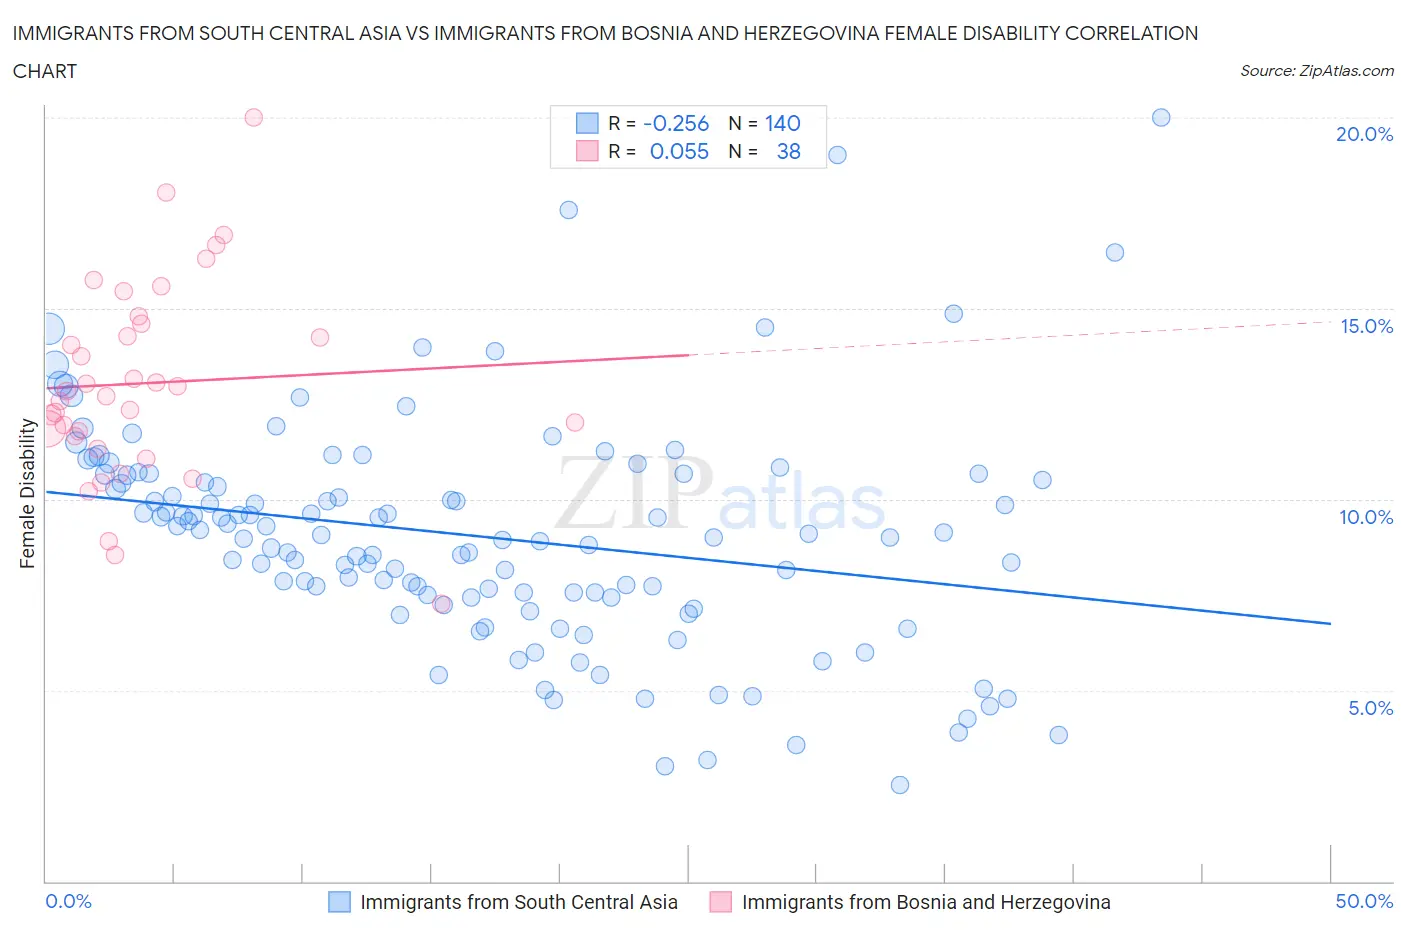 Immigrants from South Central Asia vs Immigrants from Bosnia and Herzegovina Female Disability